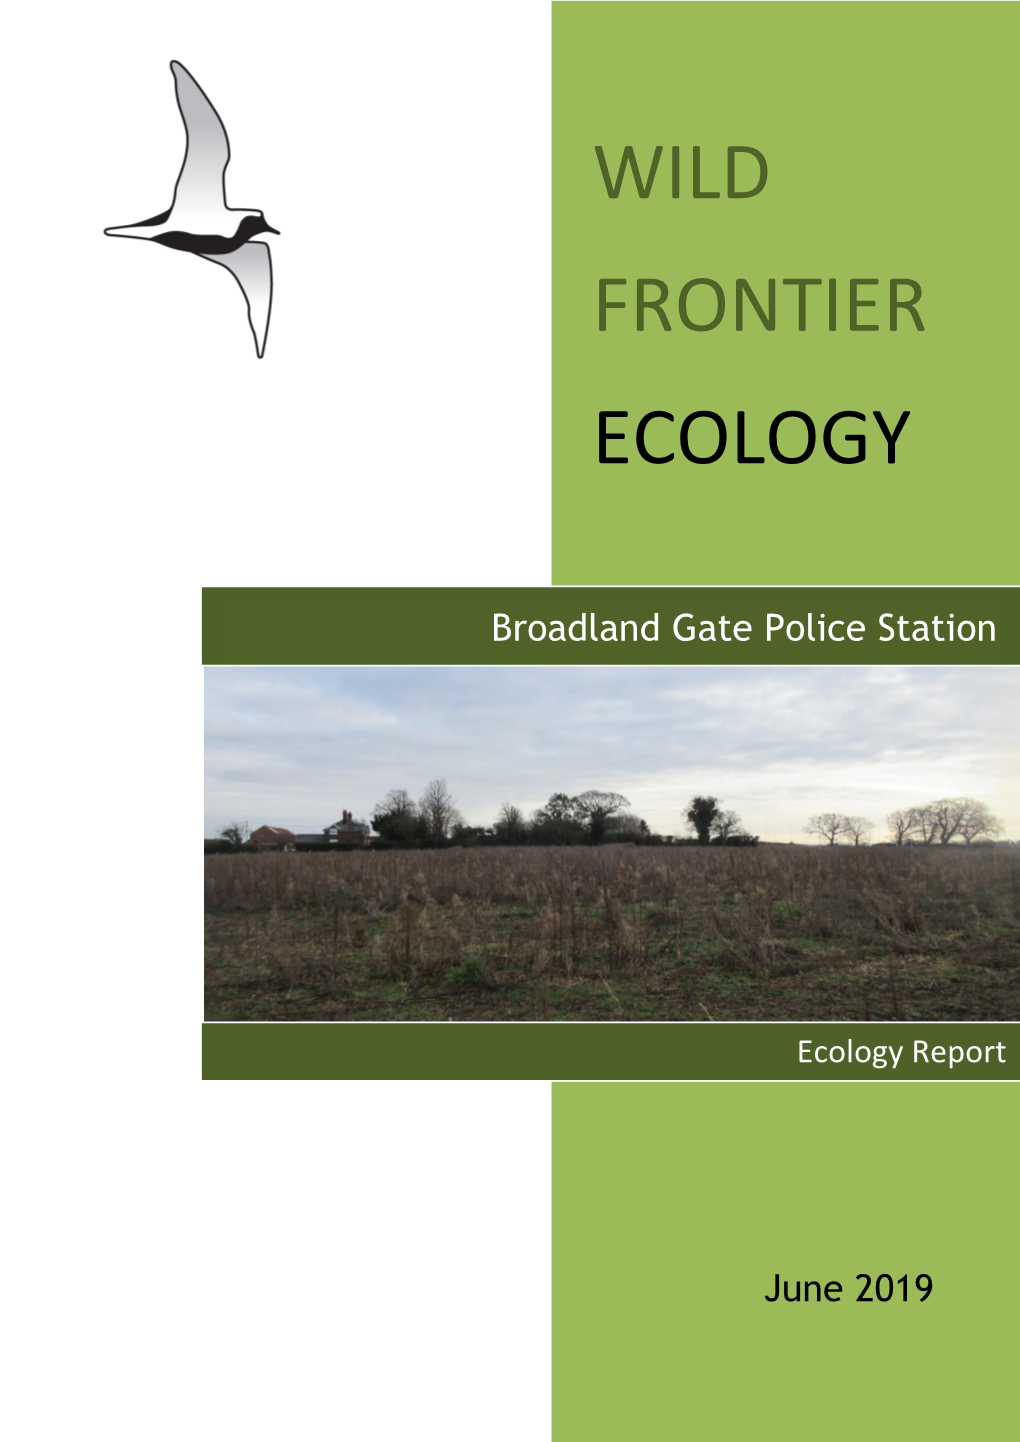 Wild Frontier Ecology